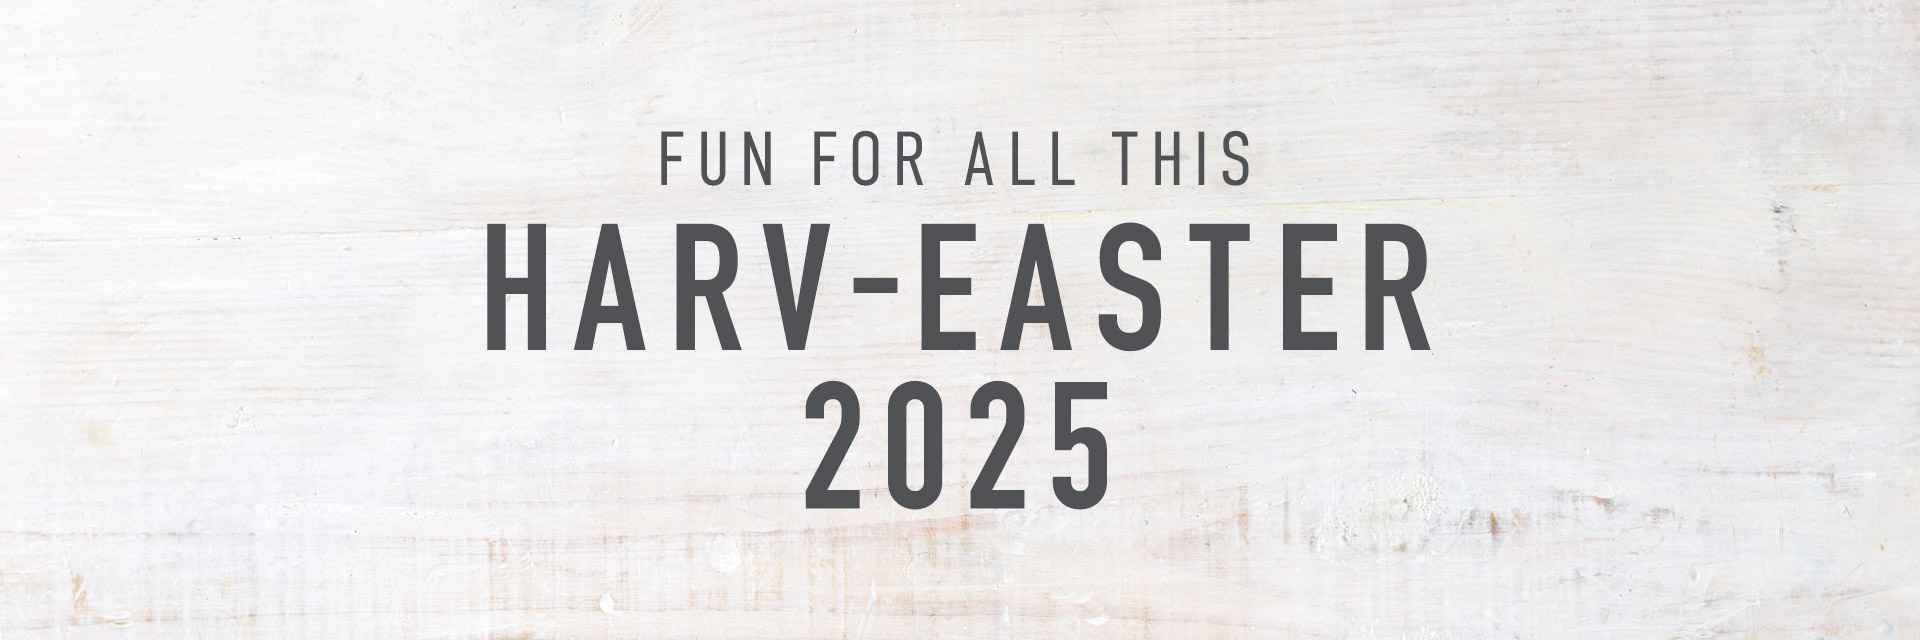 Easter at Harvester Atherleigh in Leigh 2025